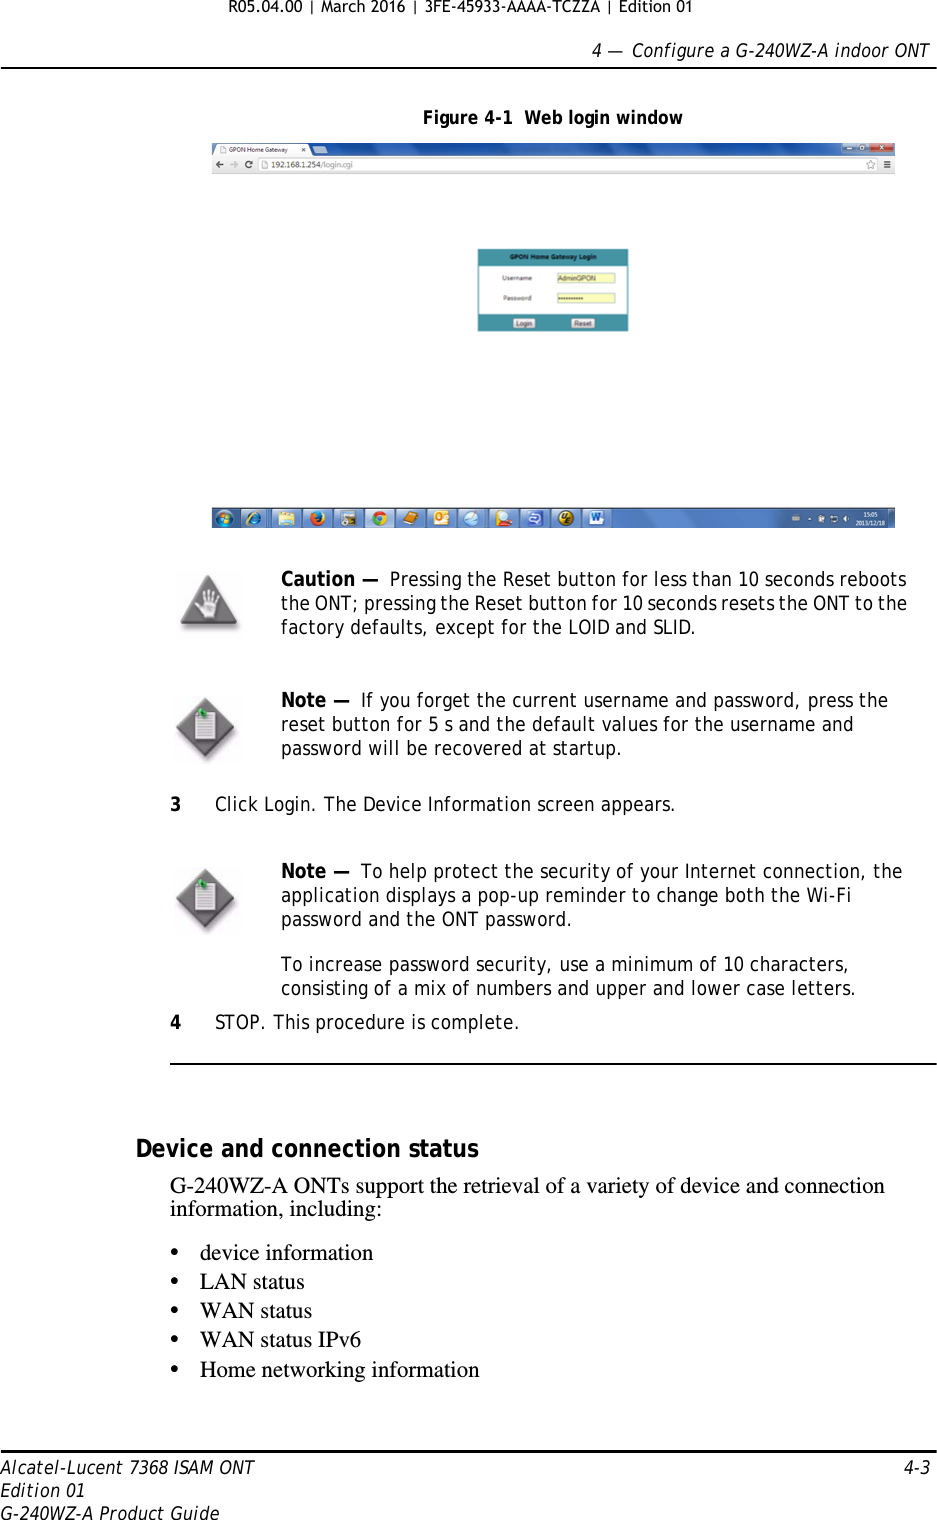 4 —  Configure a G-240WZ-A indoor ONTAlcatel-Lucent 7368 ISAM ONT 4-3Edition 01G-240WZ-A Product GuideFigure 4-1  Web login window3Click Login. The Device Information screen appears.4STOP. This procedure is complete.Device and connection statusG-240WZ-A ONTs support the retrieval of a variety of device and connection information, including:•device information•LAN status•WAN status•WAN status IPv6•Home networking informationCaution —  Pressing the Reset button for less than 10 seconds reboots the ONT; pressing the Reset button for 10 seconds resets the ONT to the factory defaults, except for the LOID and SLID.Note —  If you forget the current username and password, press the reset button for 5 s and the default values for the username and password will be recovered at startup. Note —  To help protect the security of your Internet connection, the application displays a pop-up reminder to change both the Wi-Fi password and the ONT password. To increase password security, use a minimum of 10 characters, consisting of a mix of numbers and upper and lower case letters.R05.04.00 | March 2016 | 3FE-45933-AAAA-TCZZA | Edition 01 